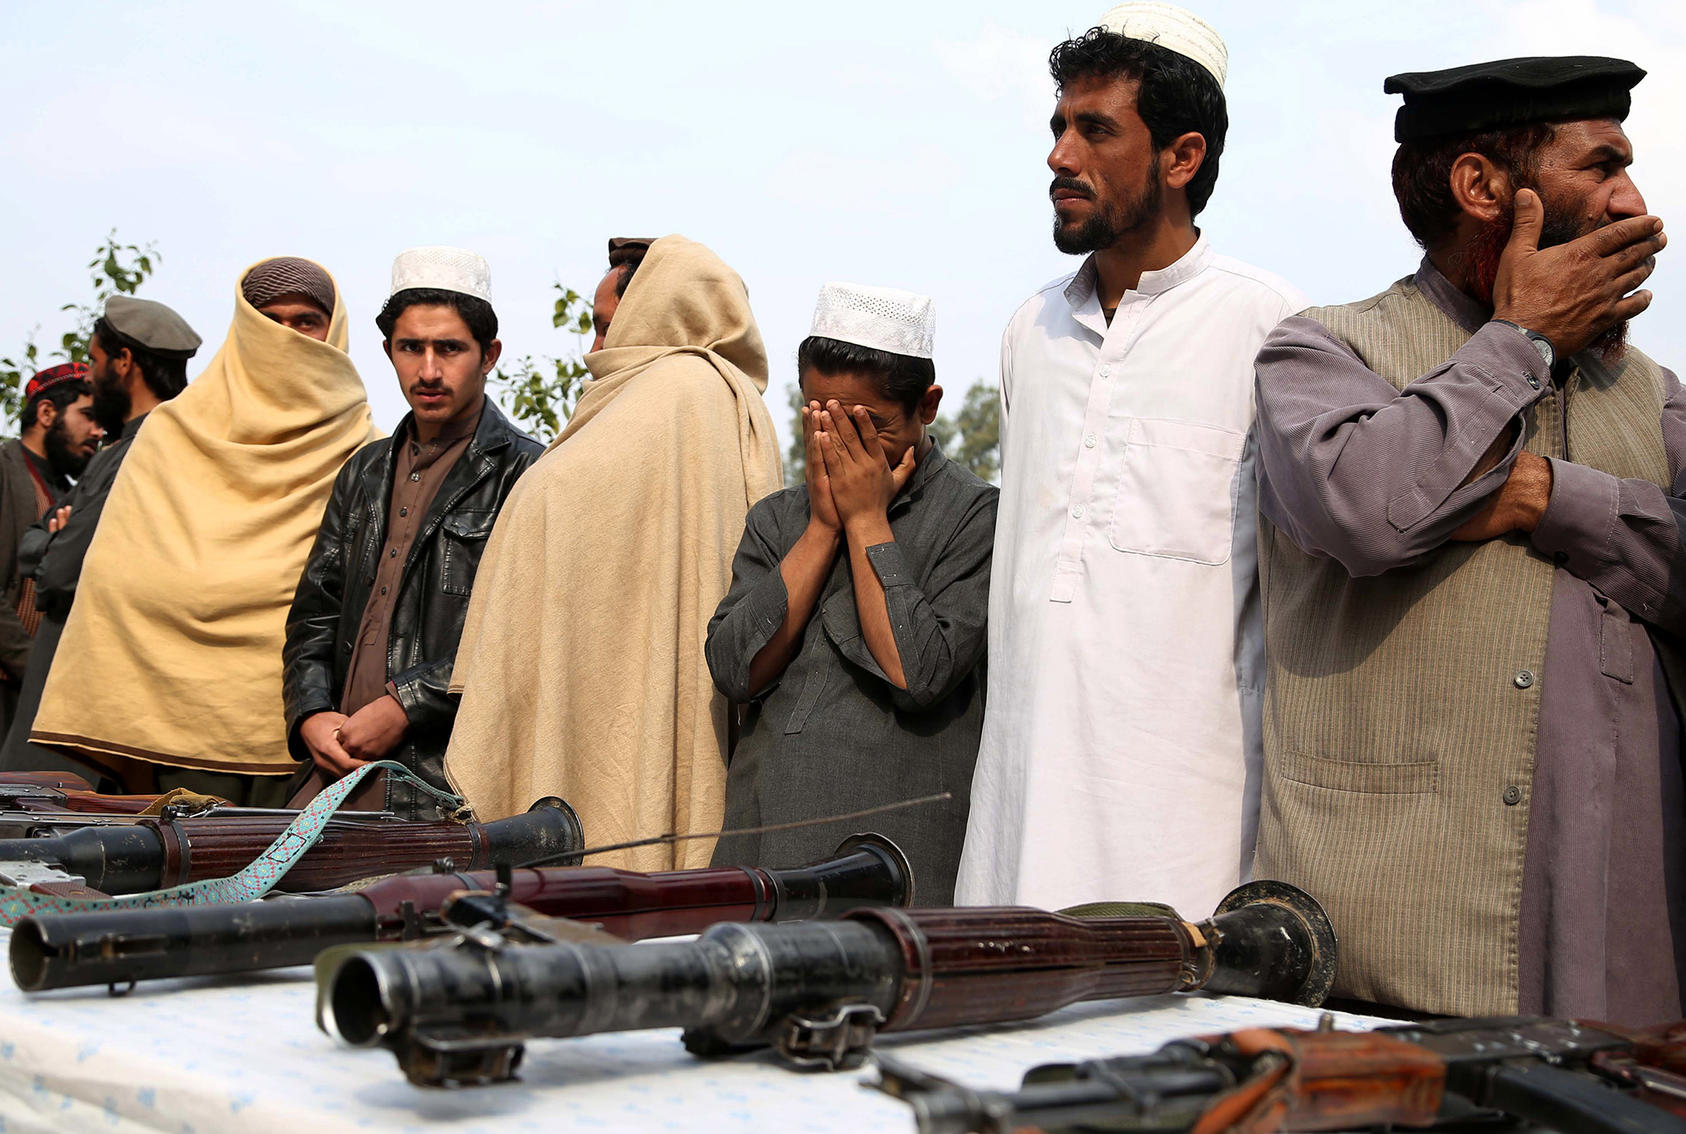 A group of former Taliban members and Islamic State militants laid down their arms in Jalalabad and joined the peace process in February 2019. (Photo by Ghulamullah Habibi/EPA-EFE/Shutterstock)